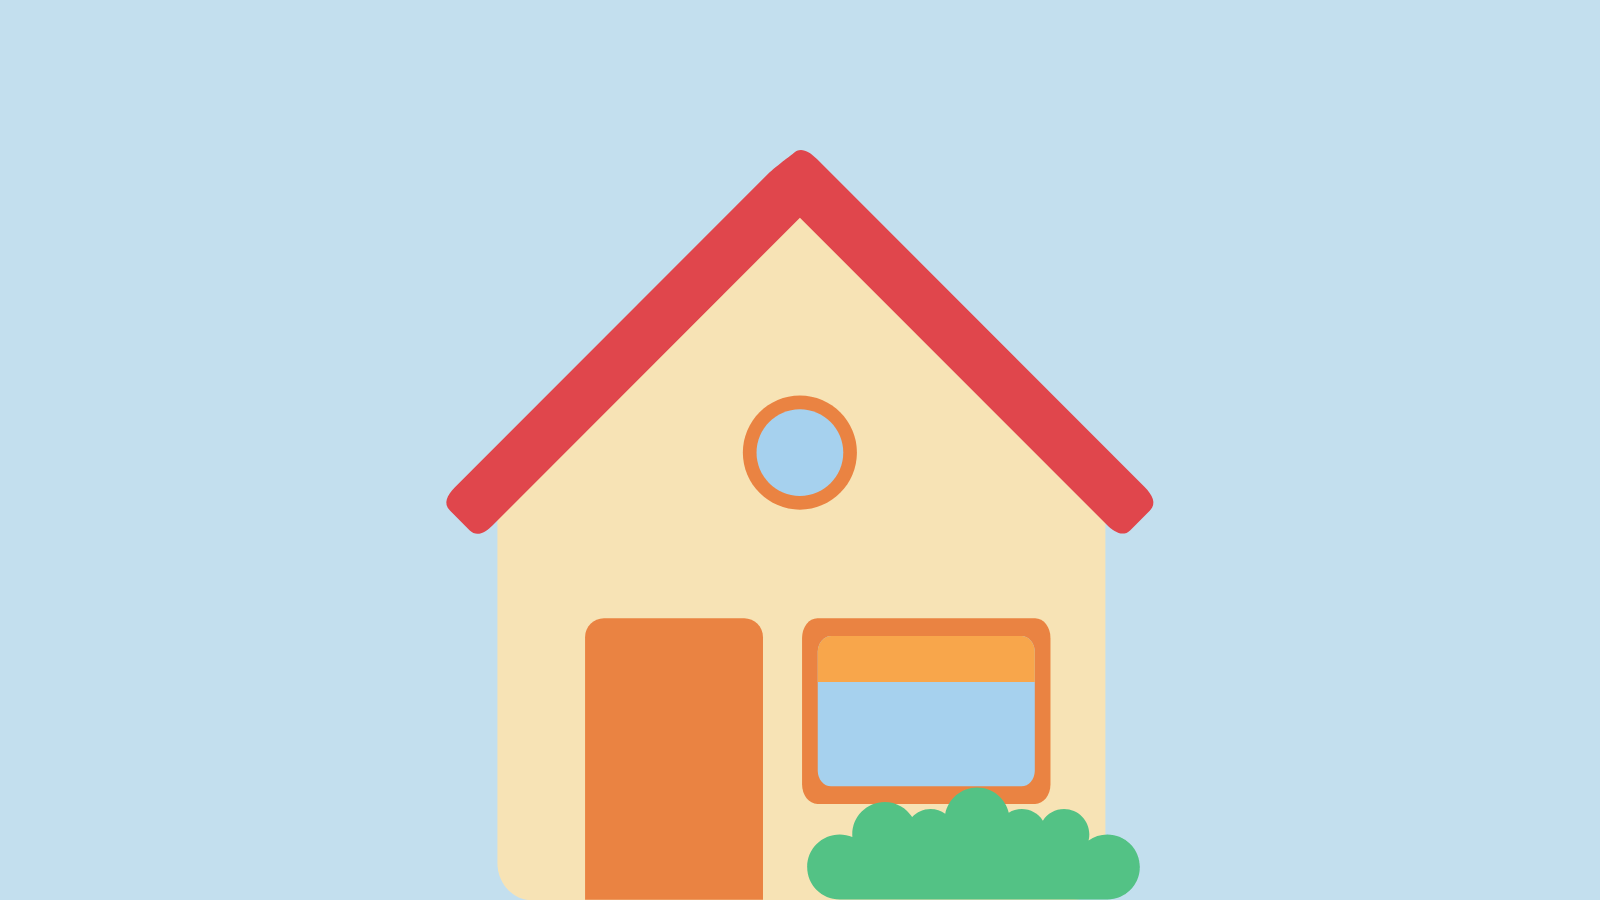 A simple illustration of a house 